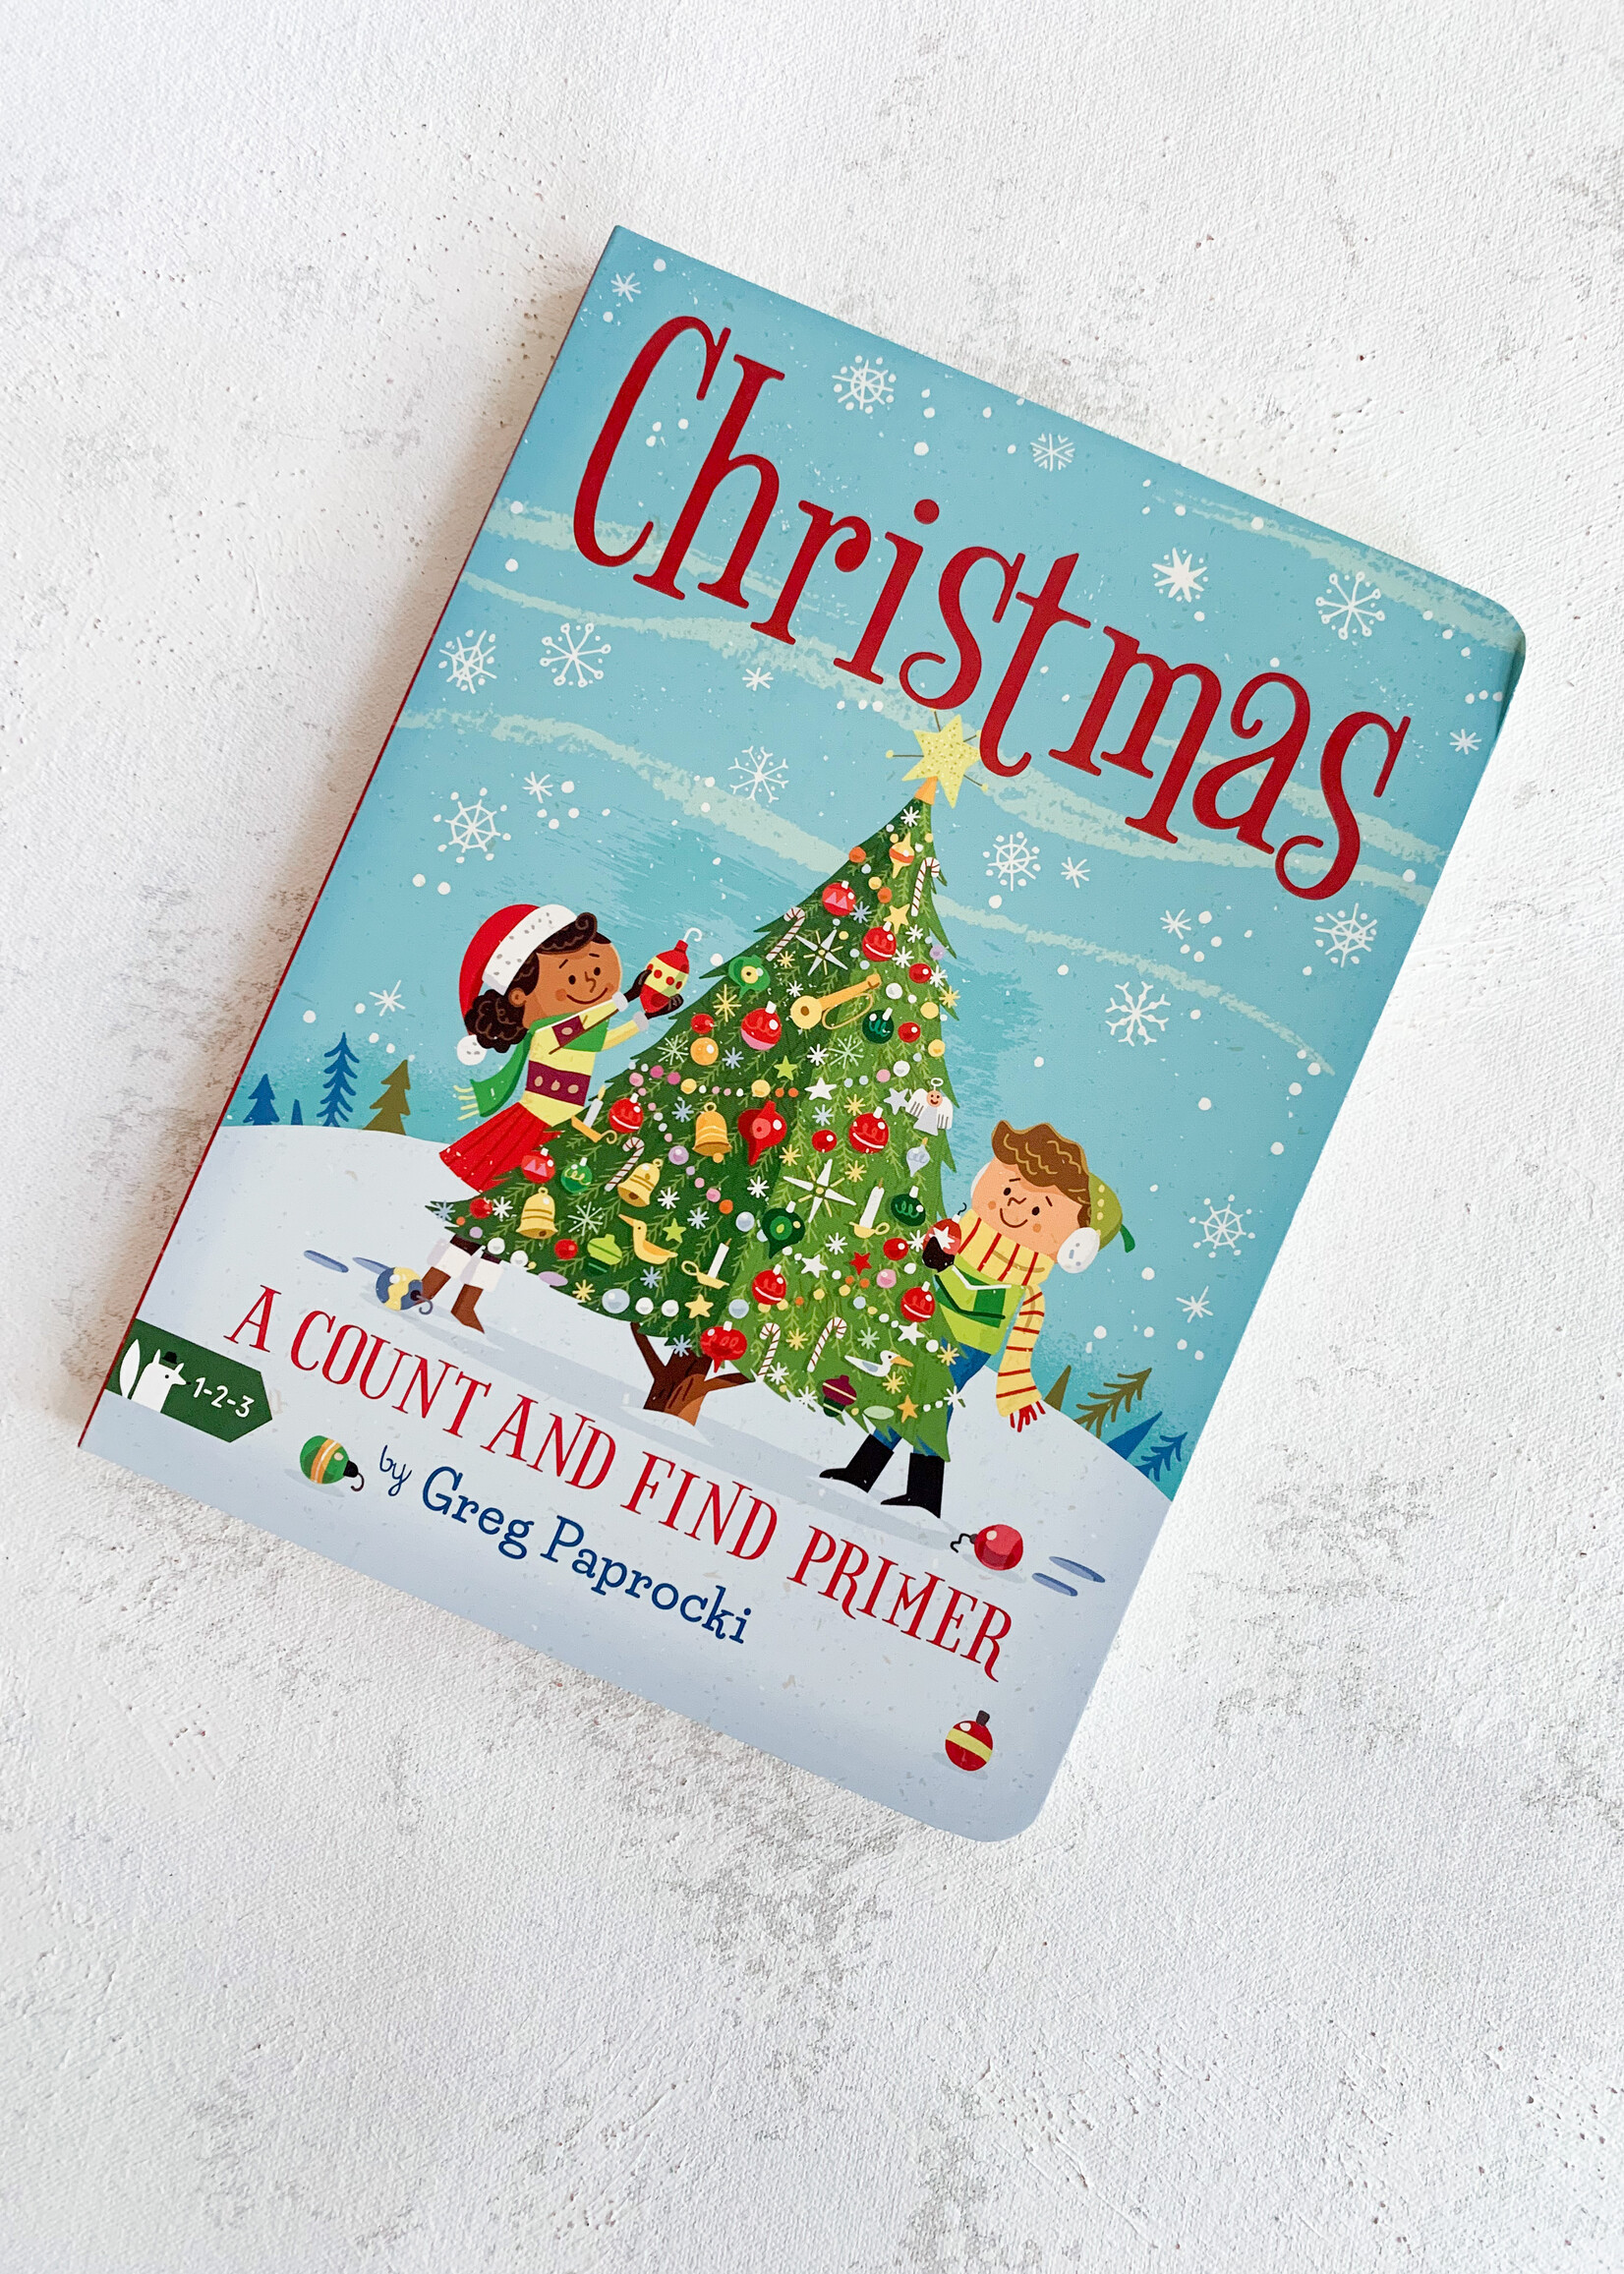 Elitaire Petite Christmas A Count and Find Primer